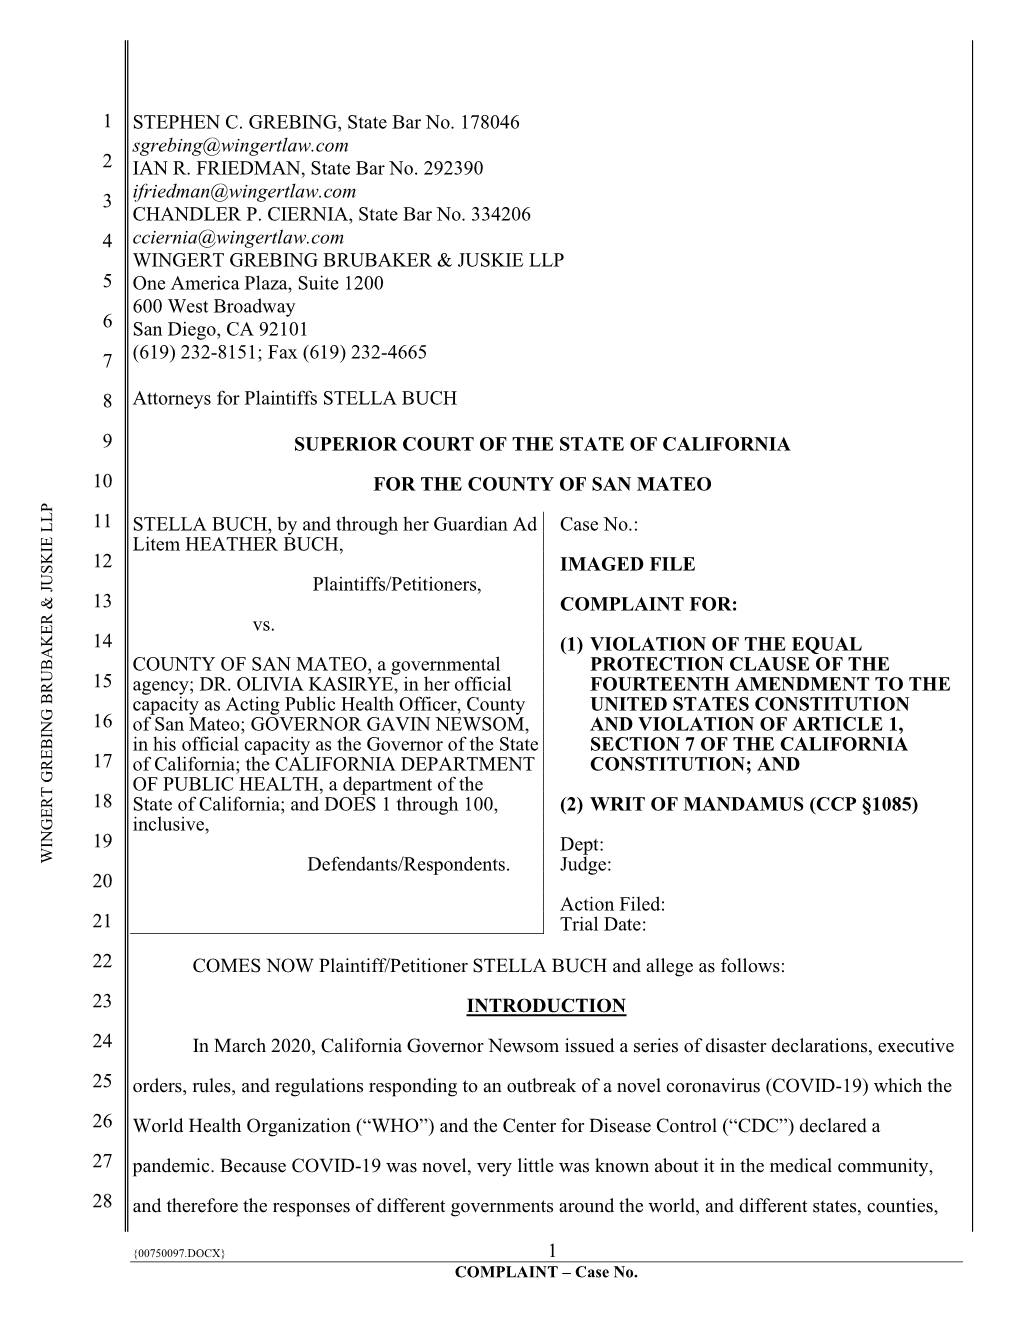 Filed This Lawsuit in San Mateo County